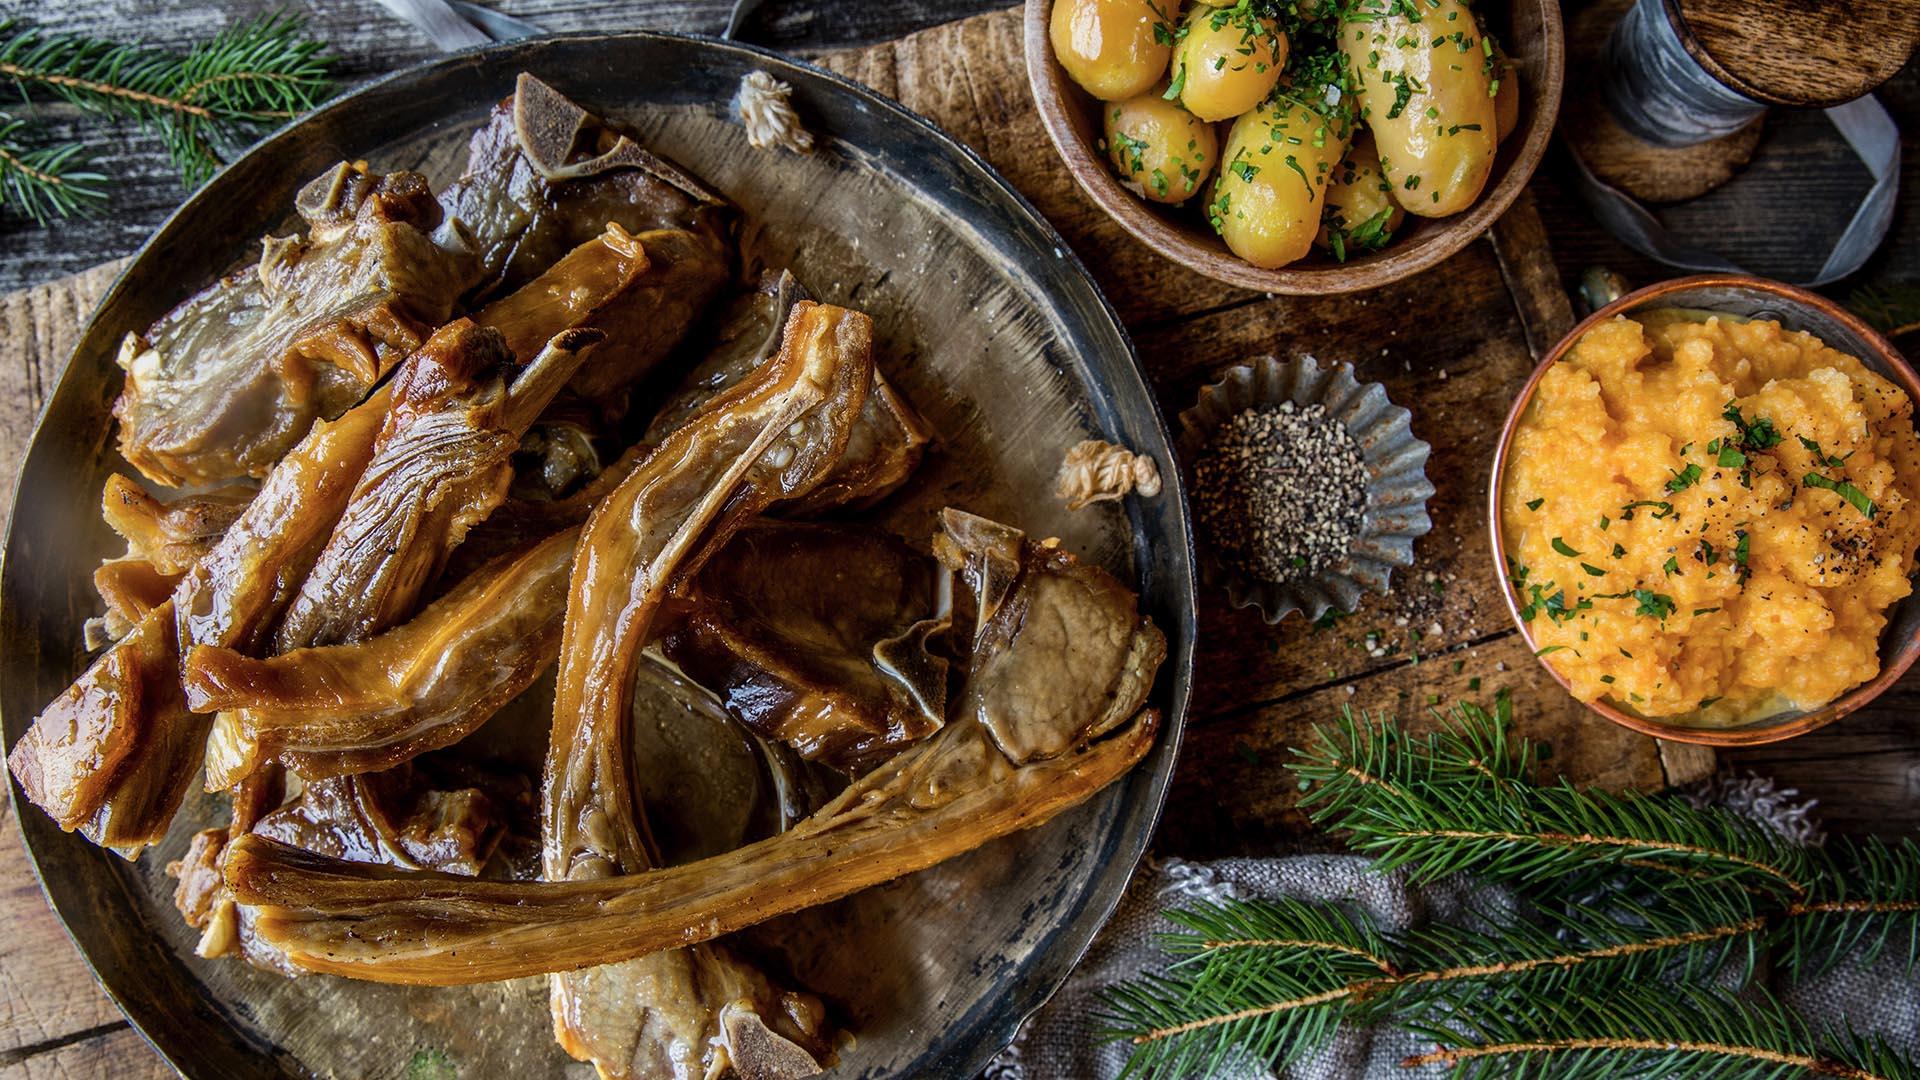 From aboce one can see a serving og the traditional dish pinnekjøtt, dried saltes lamb racks served with potatoes and mash of turnips